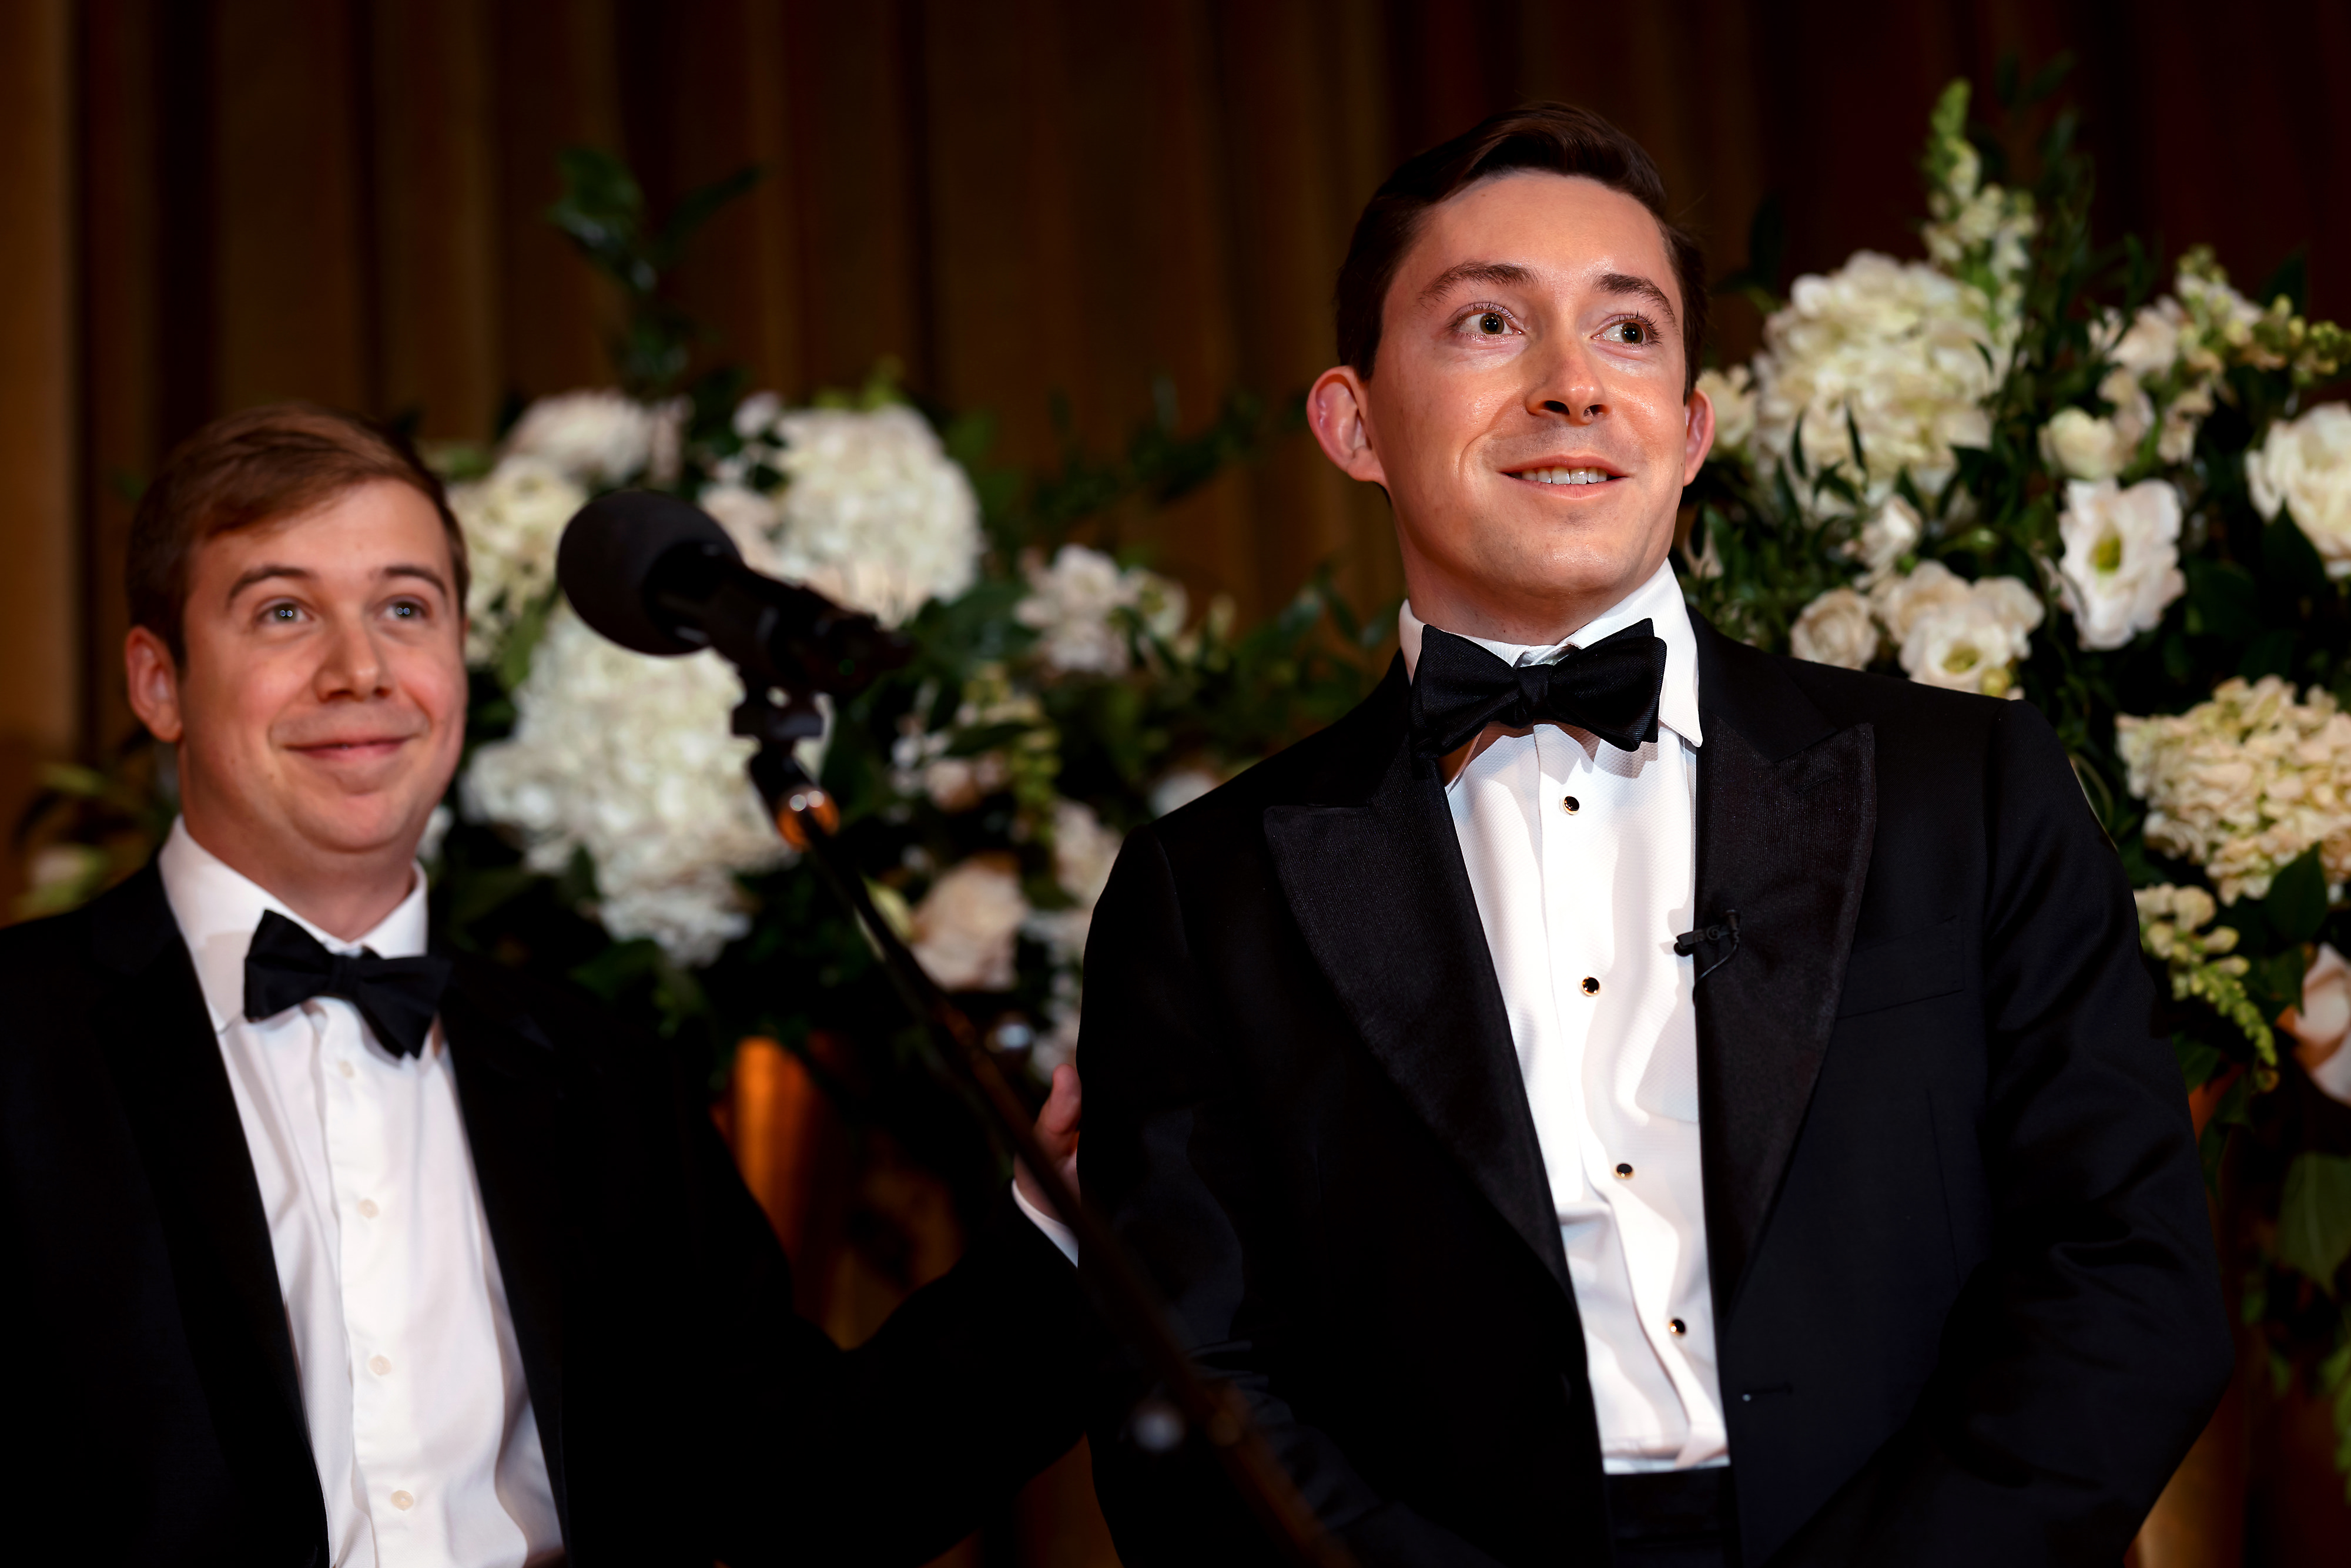 Groom reacts to seeing bride walk down the aisle during wedding ceremony at The Drake Hotel in Chicago